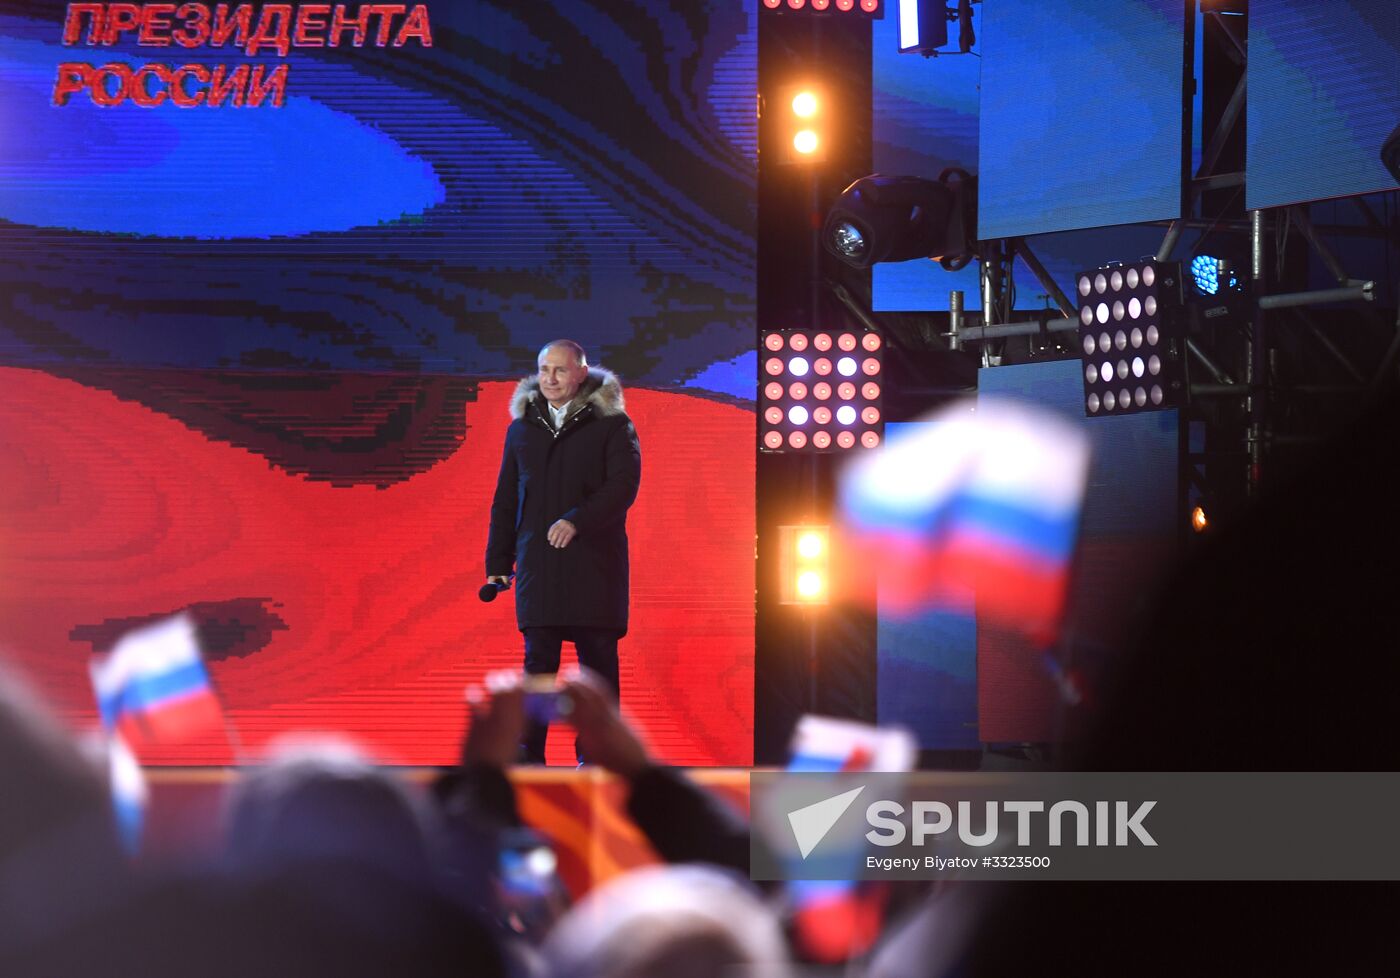 President Putin at concert and meeting in Moscow celebrating Crimea’s reunification with Russia